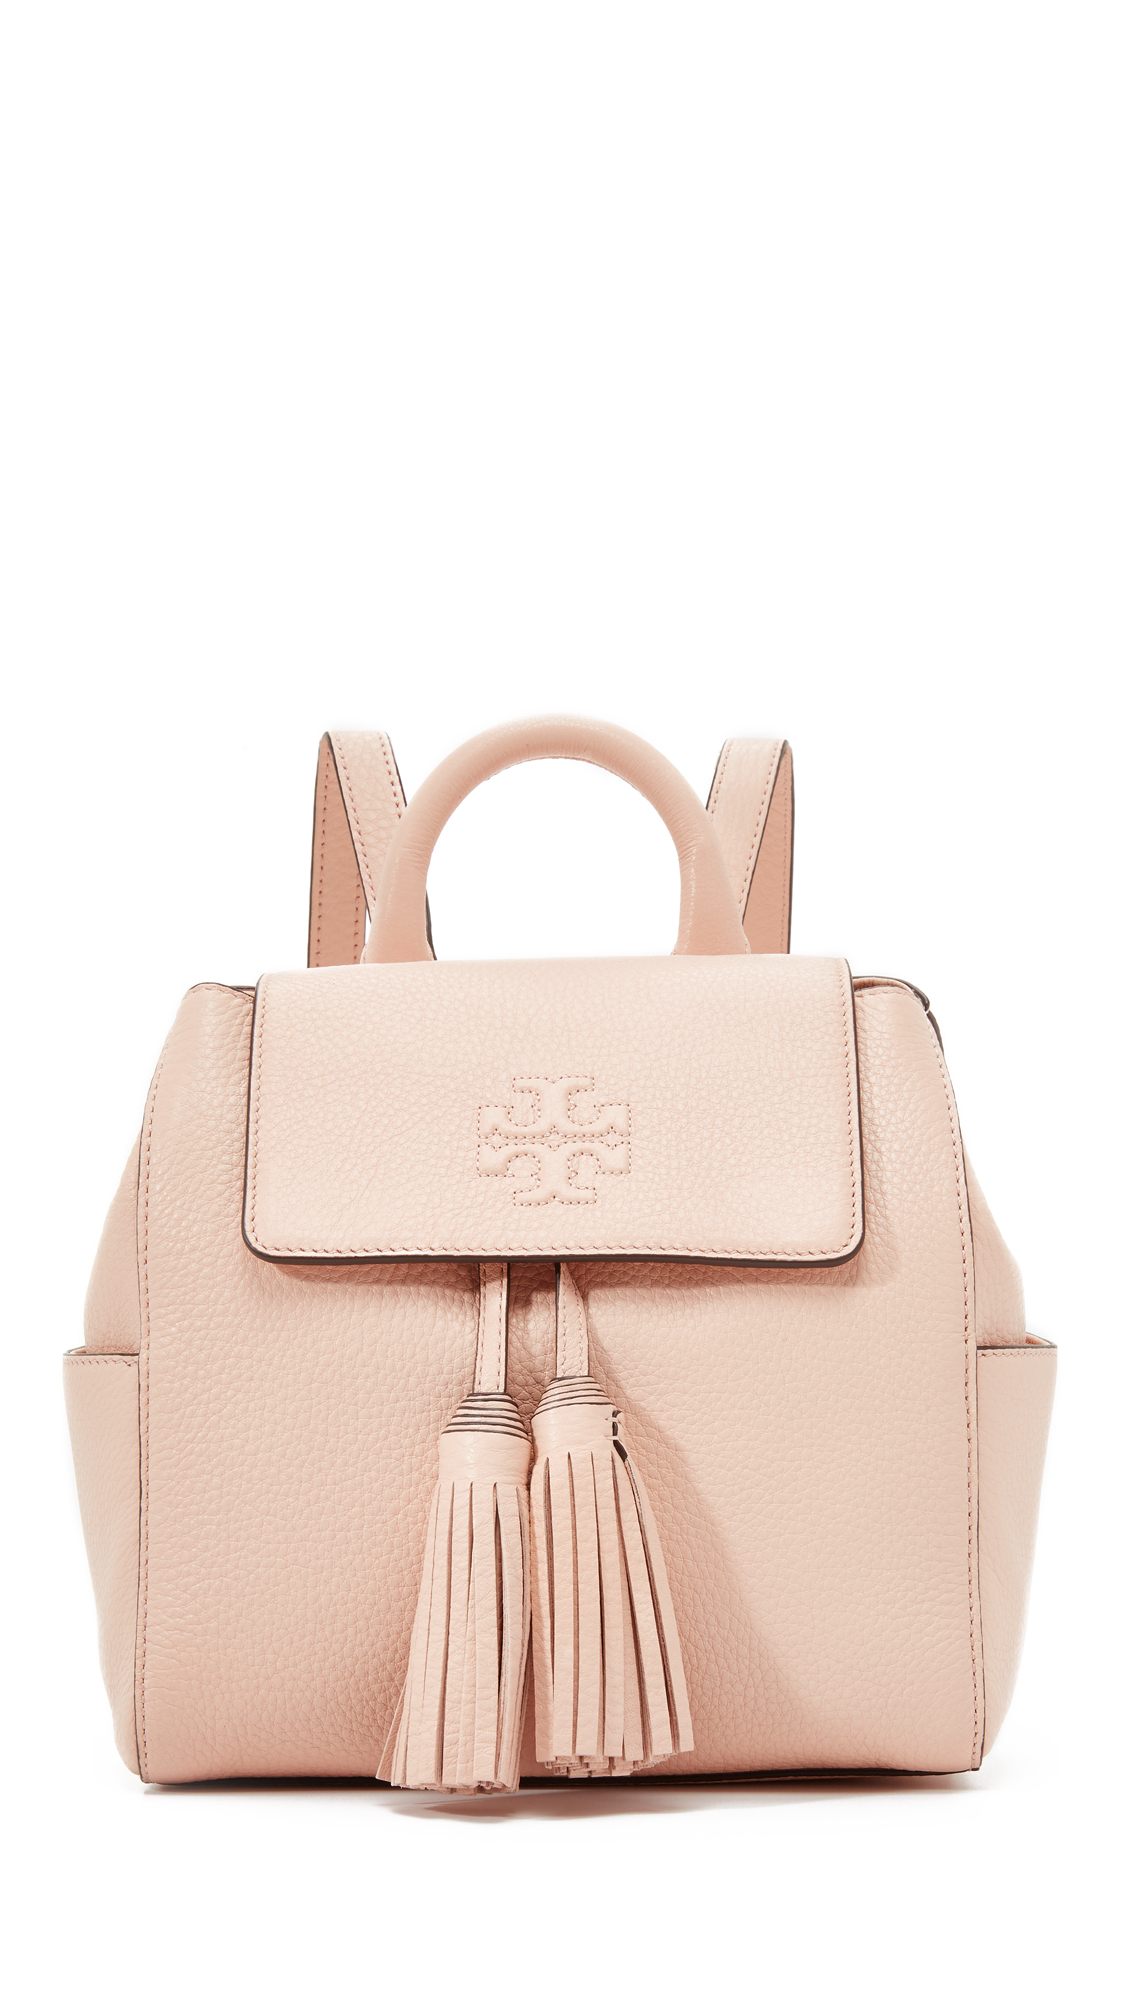 What's In My Backpack in the Summer of 2021, Tory Burch Small Thea